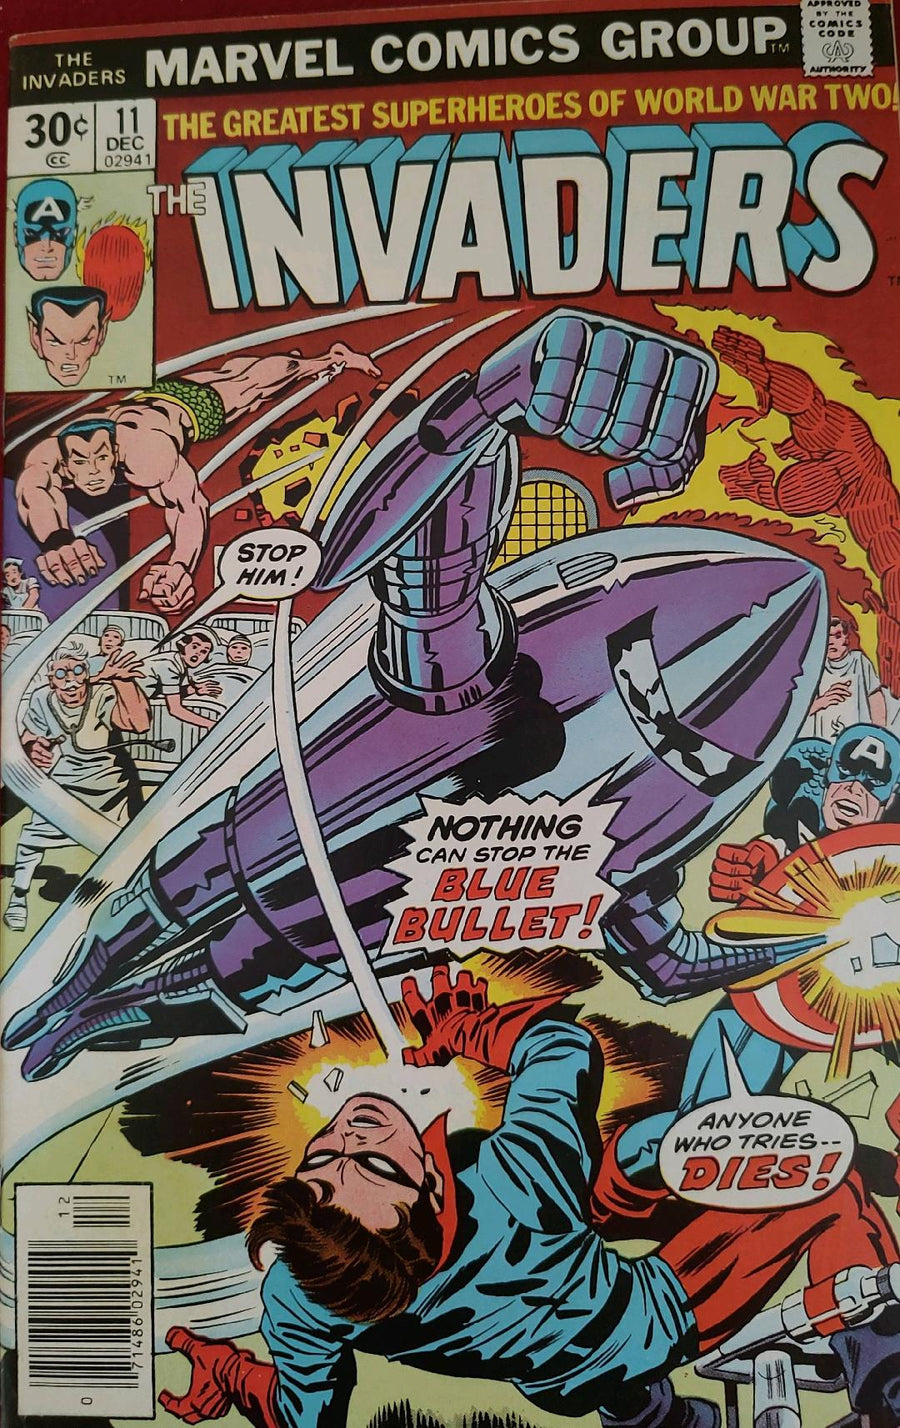 The Invaders #11 Comic Book Cover